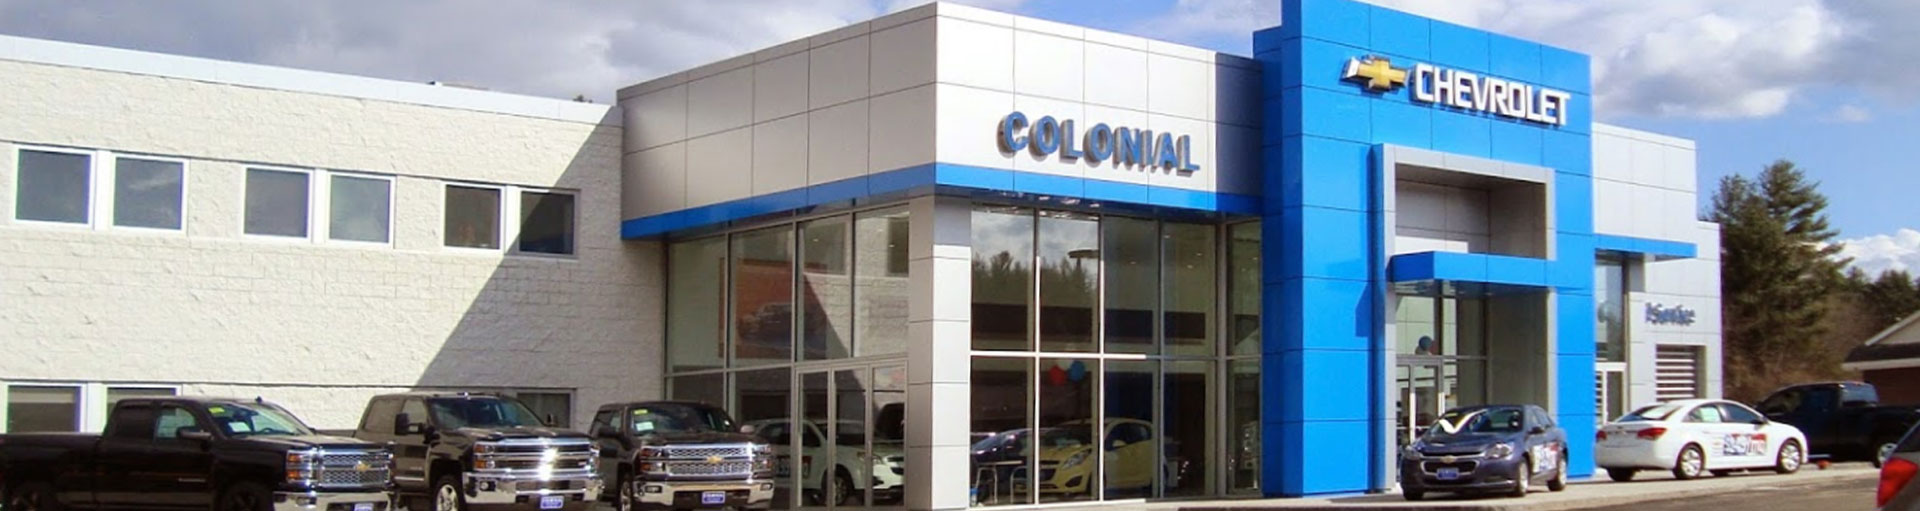 Colonial Chevrolet of Acton Oil Change Services